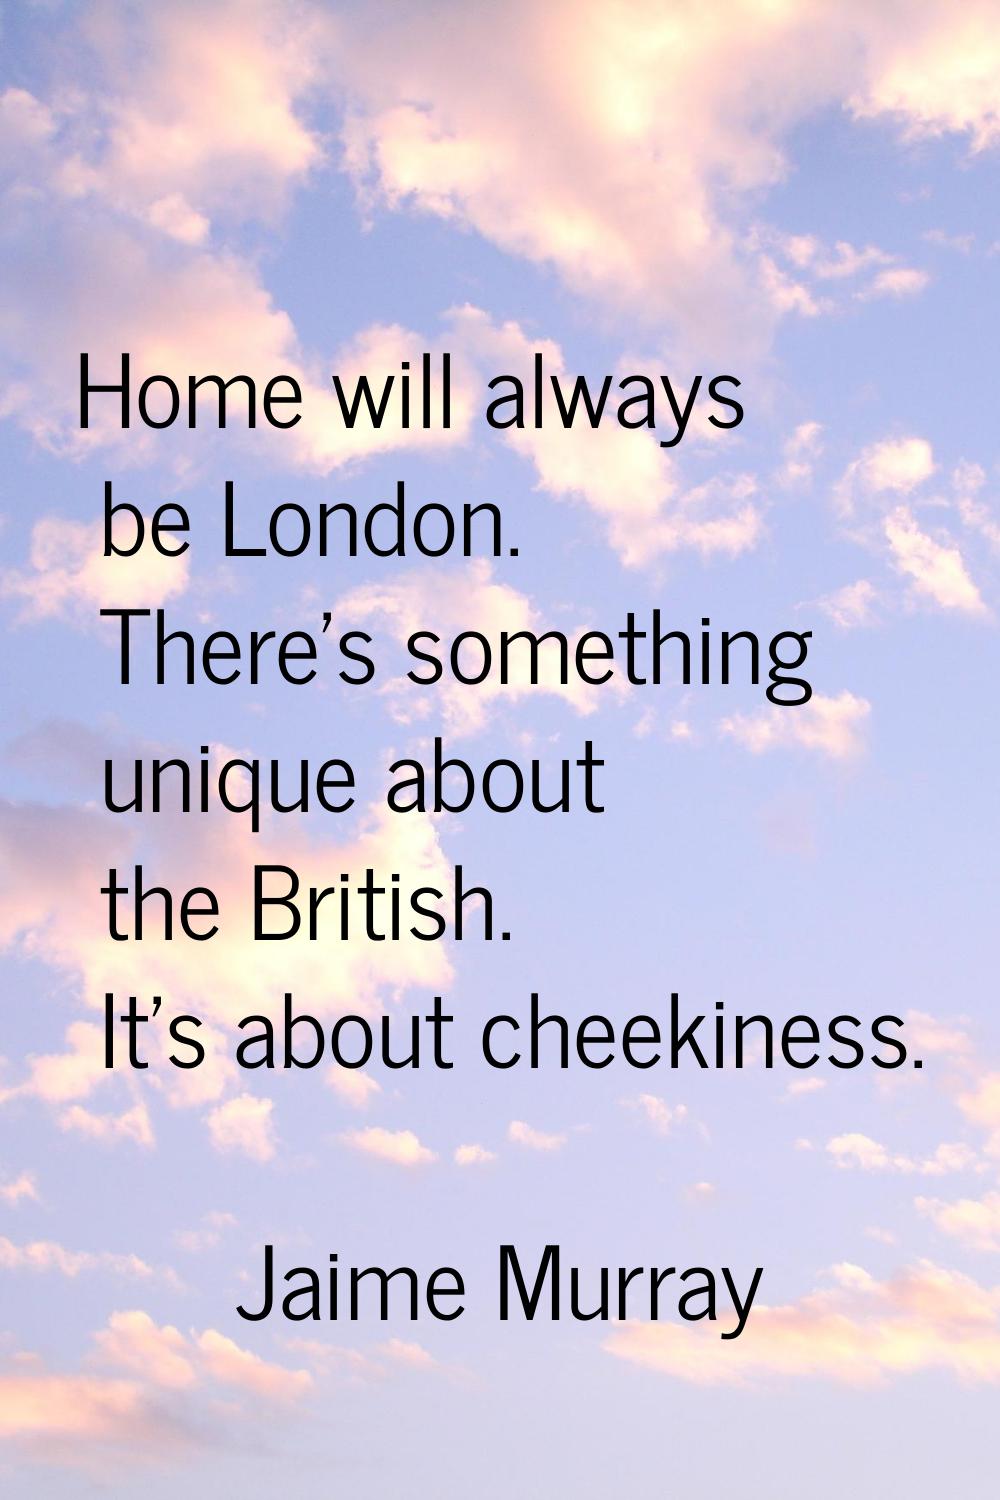 Home will always be London. There's something unique about the British. It's about cheekiness.